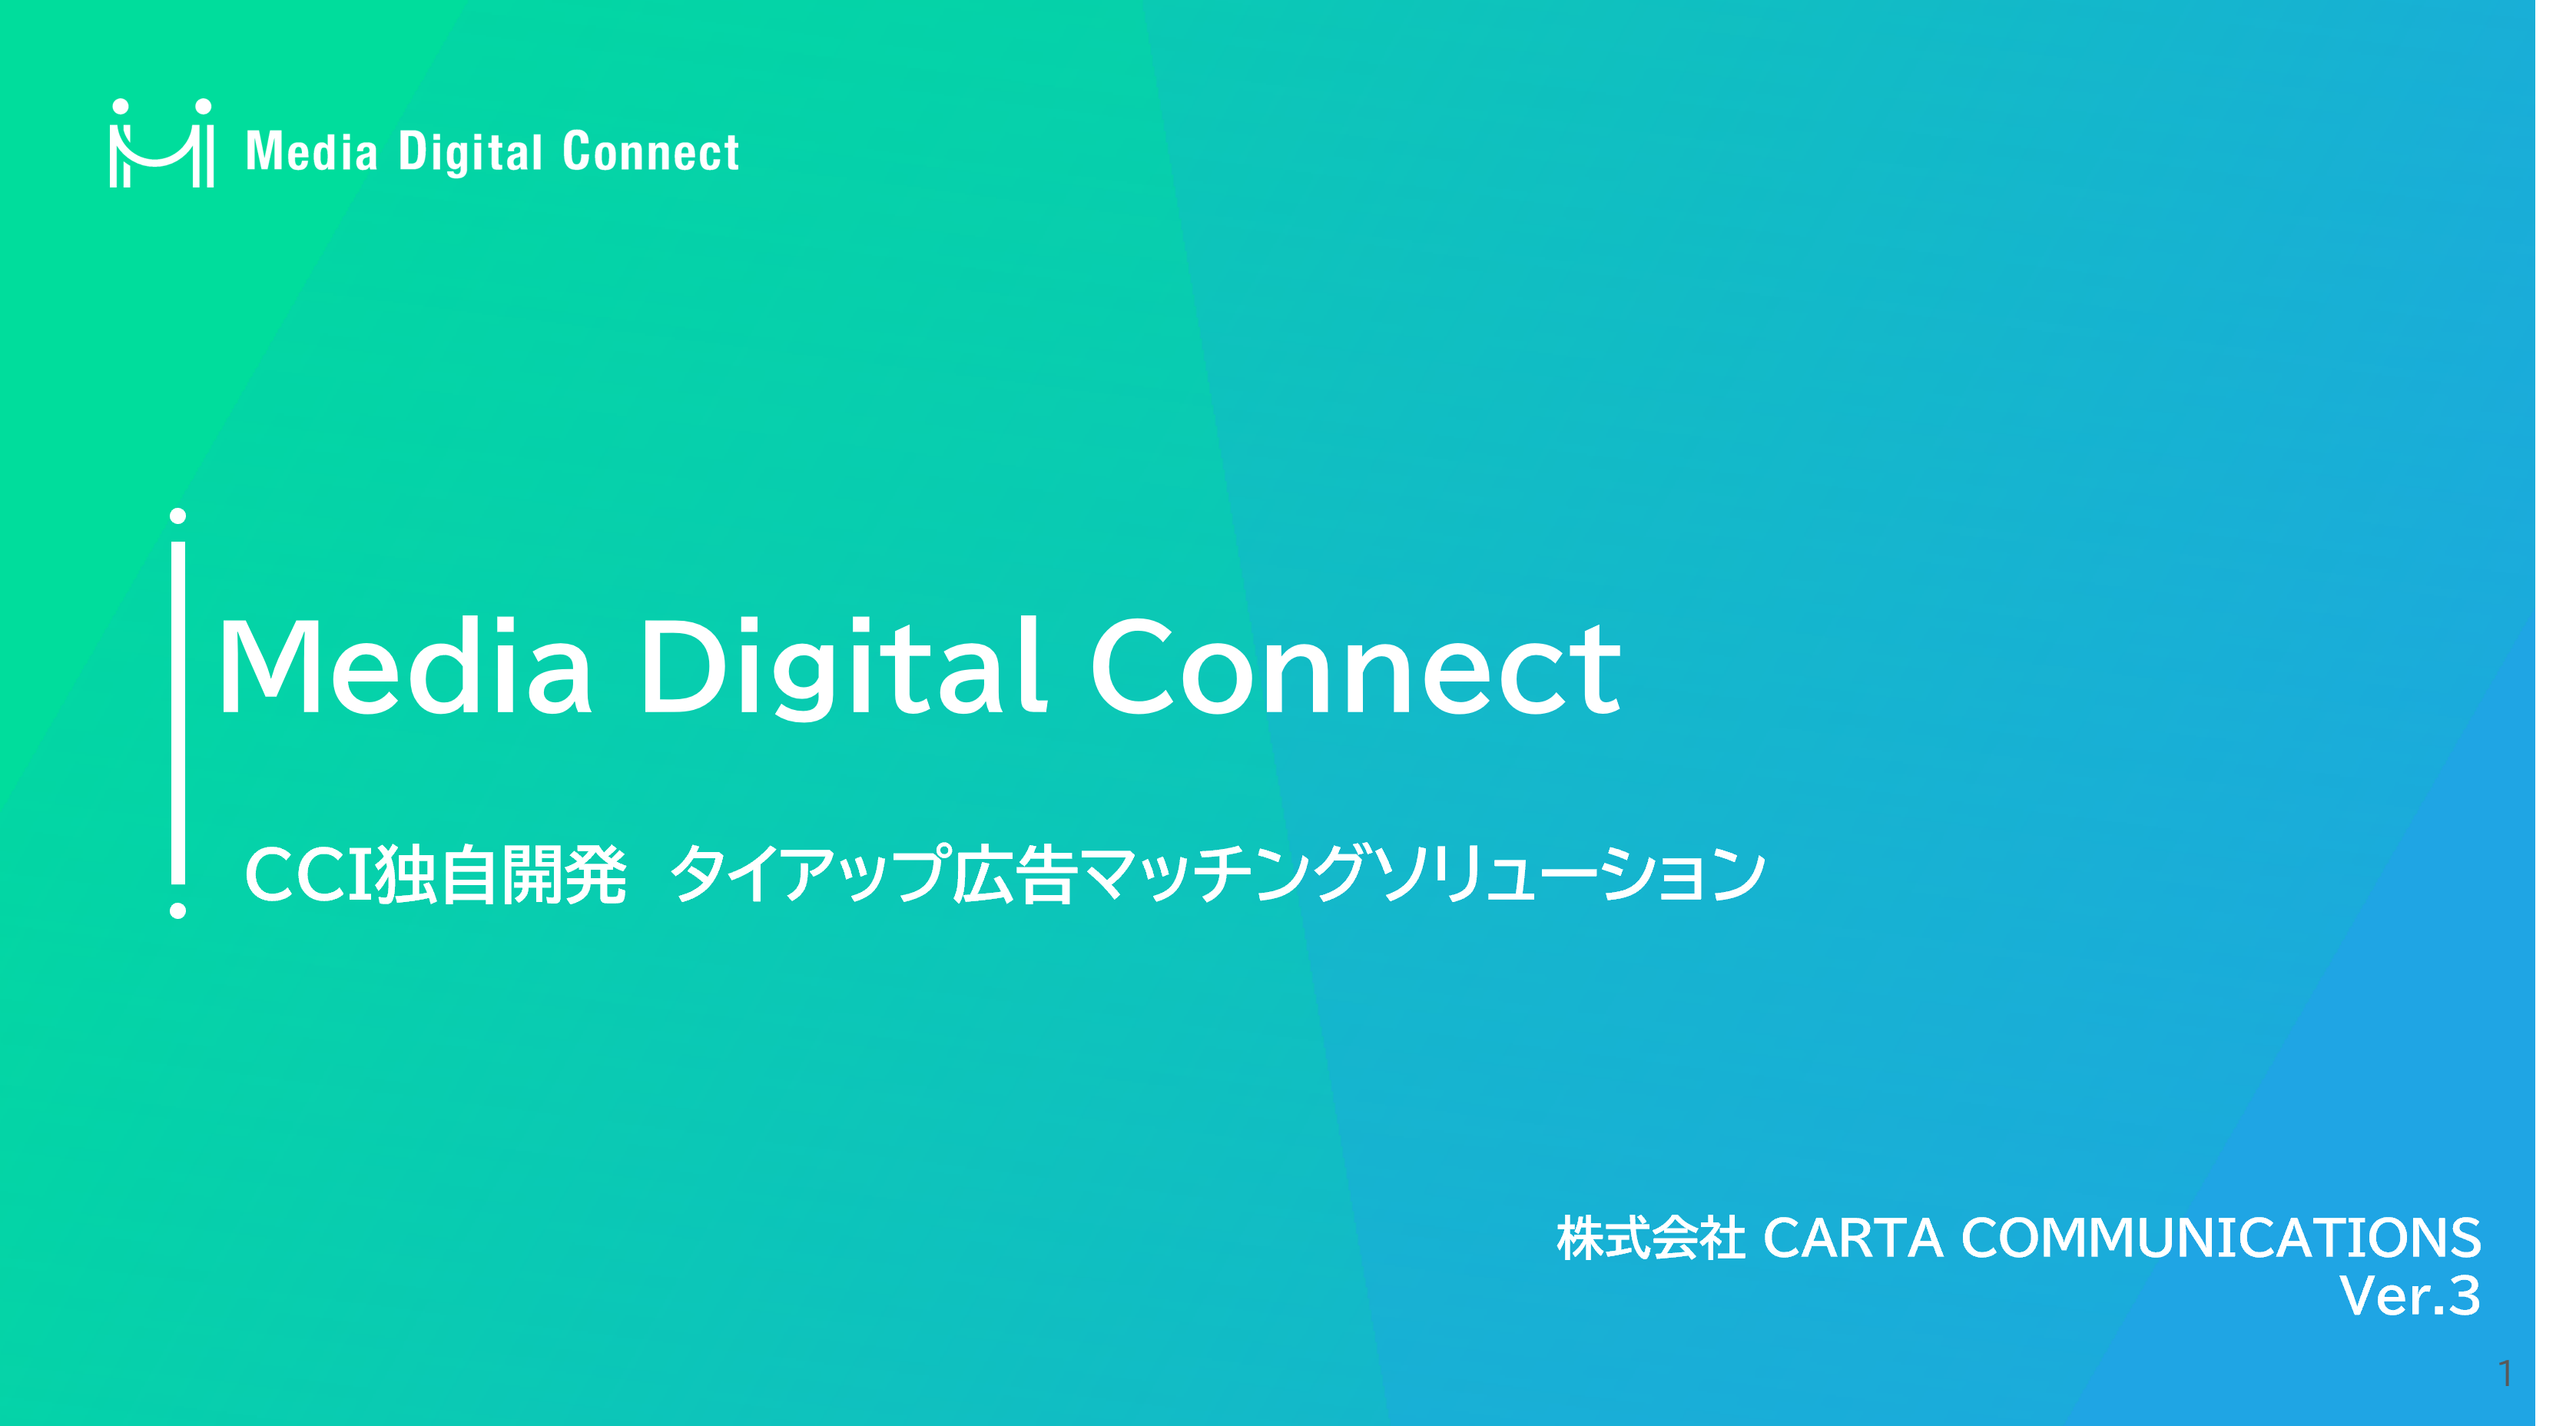 【KnowHow】【MDC_サービス資料】Media Digital Connect_広告会社向け